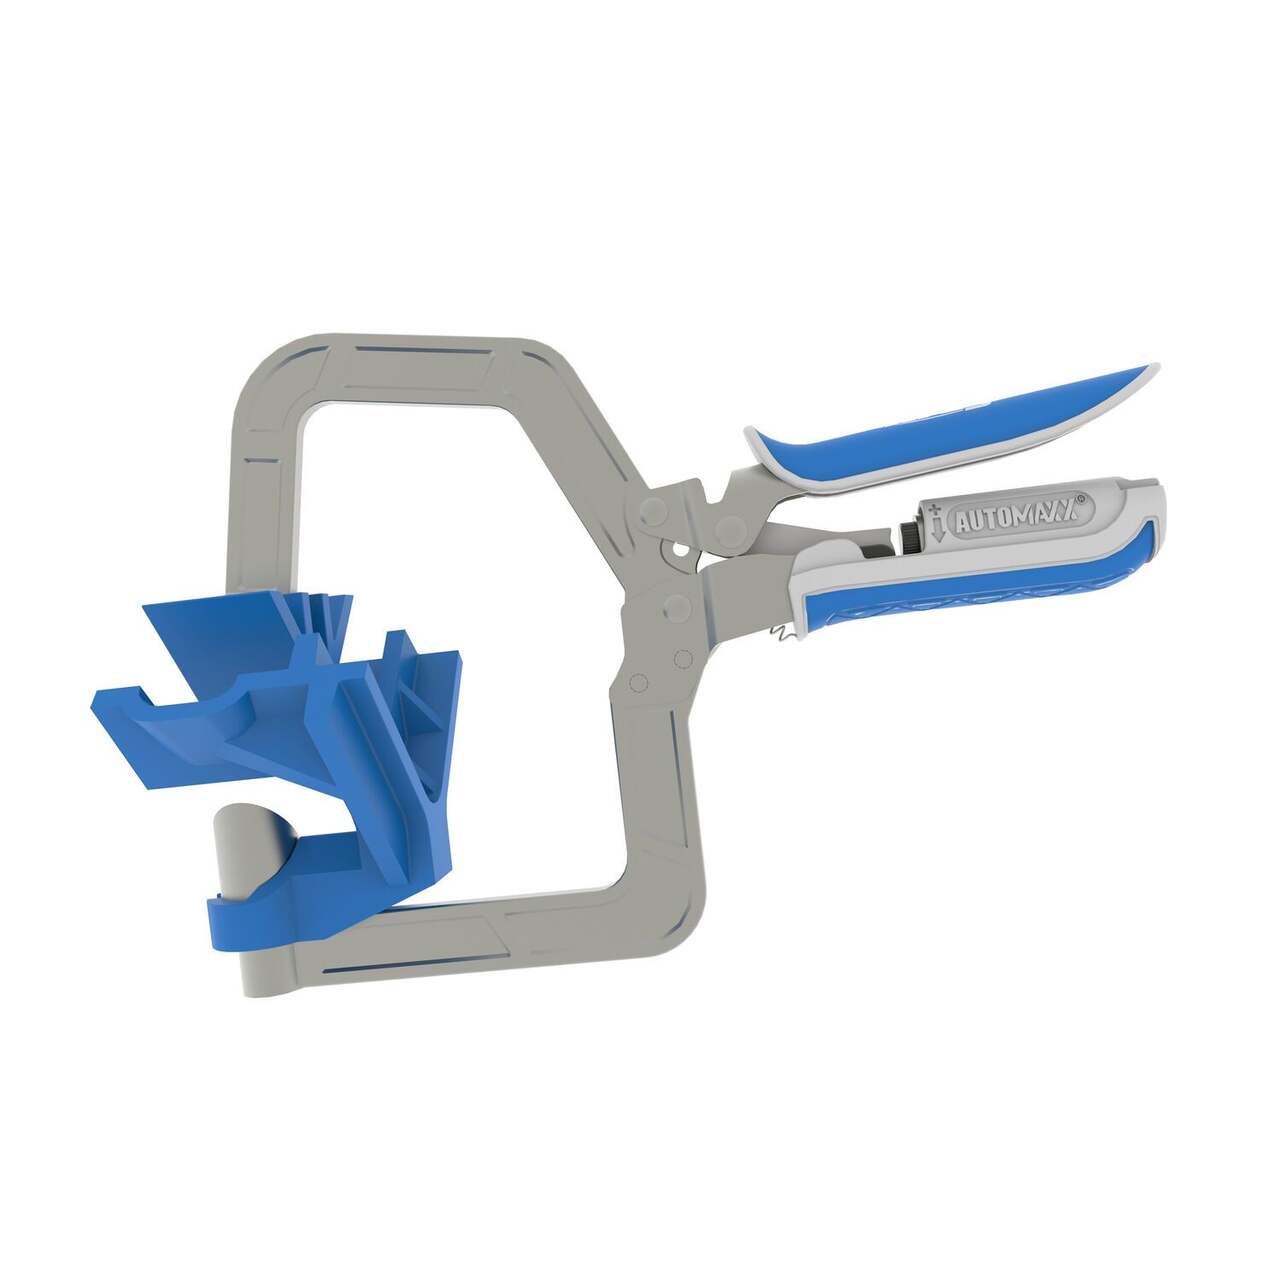 Multi-functional Corner Clamp For Kreg Jigs and 90° Corner Joints &T Joints  Tool